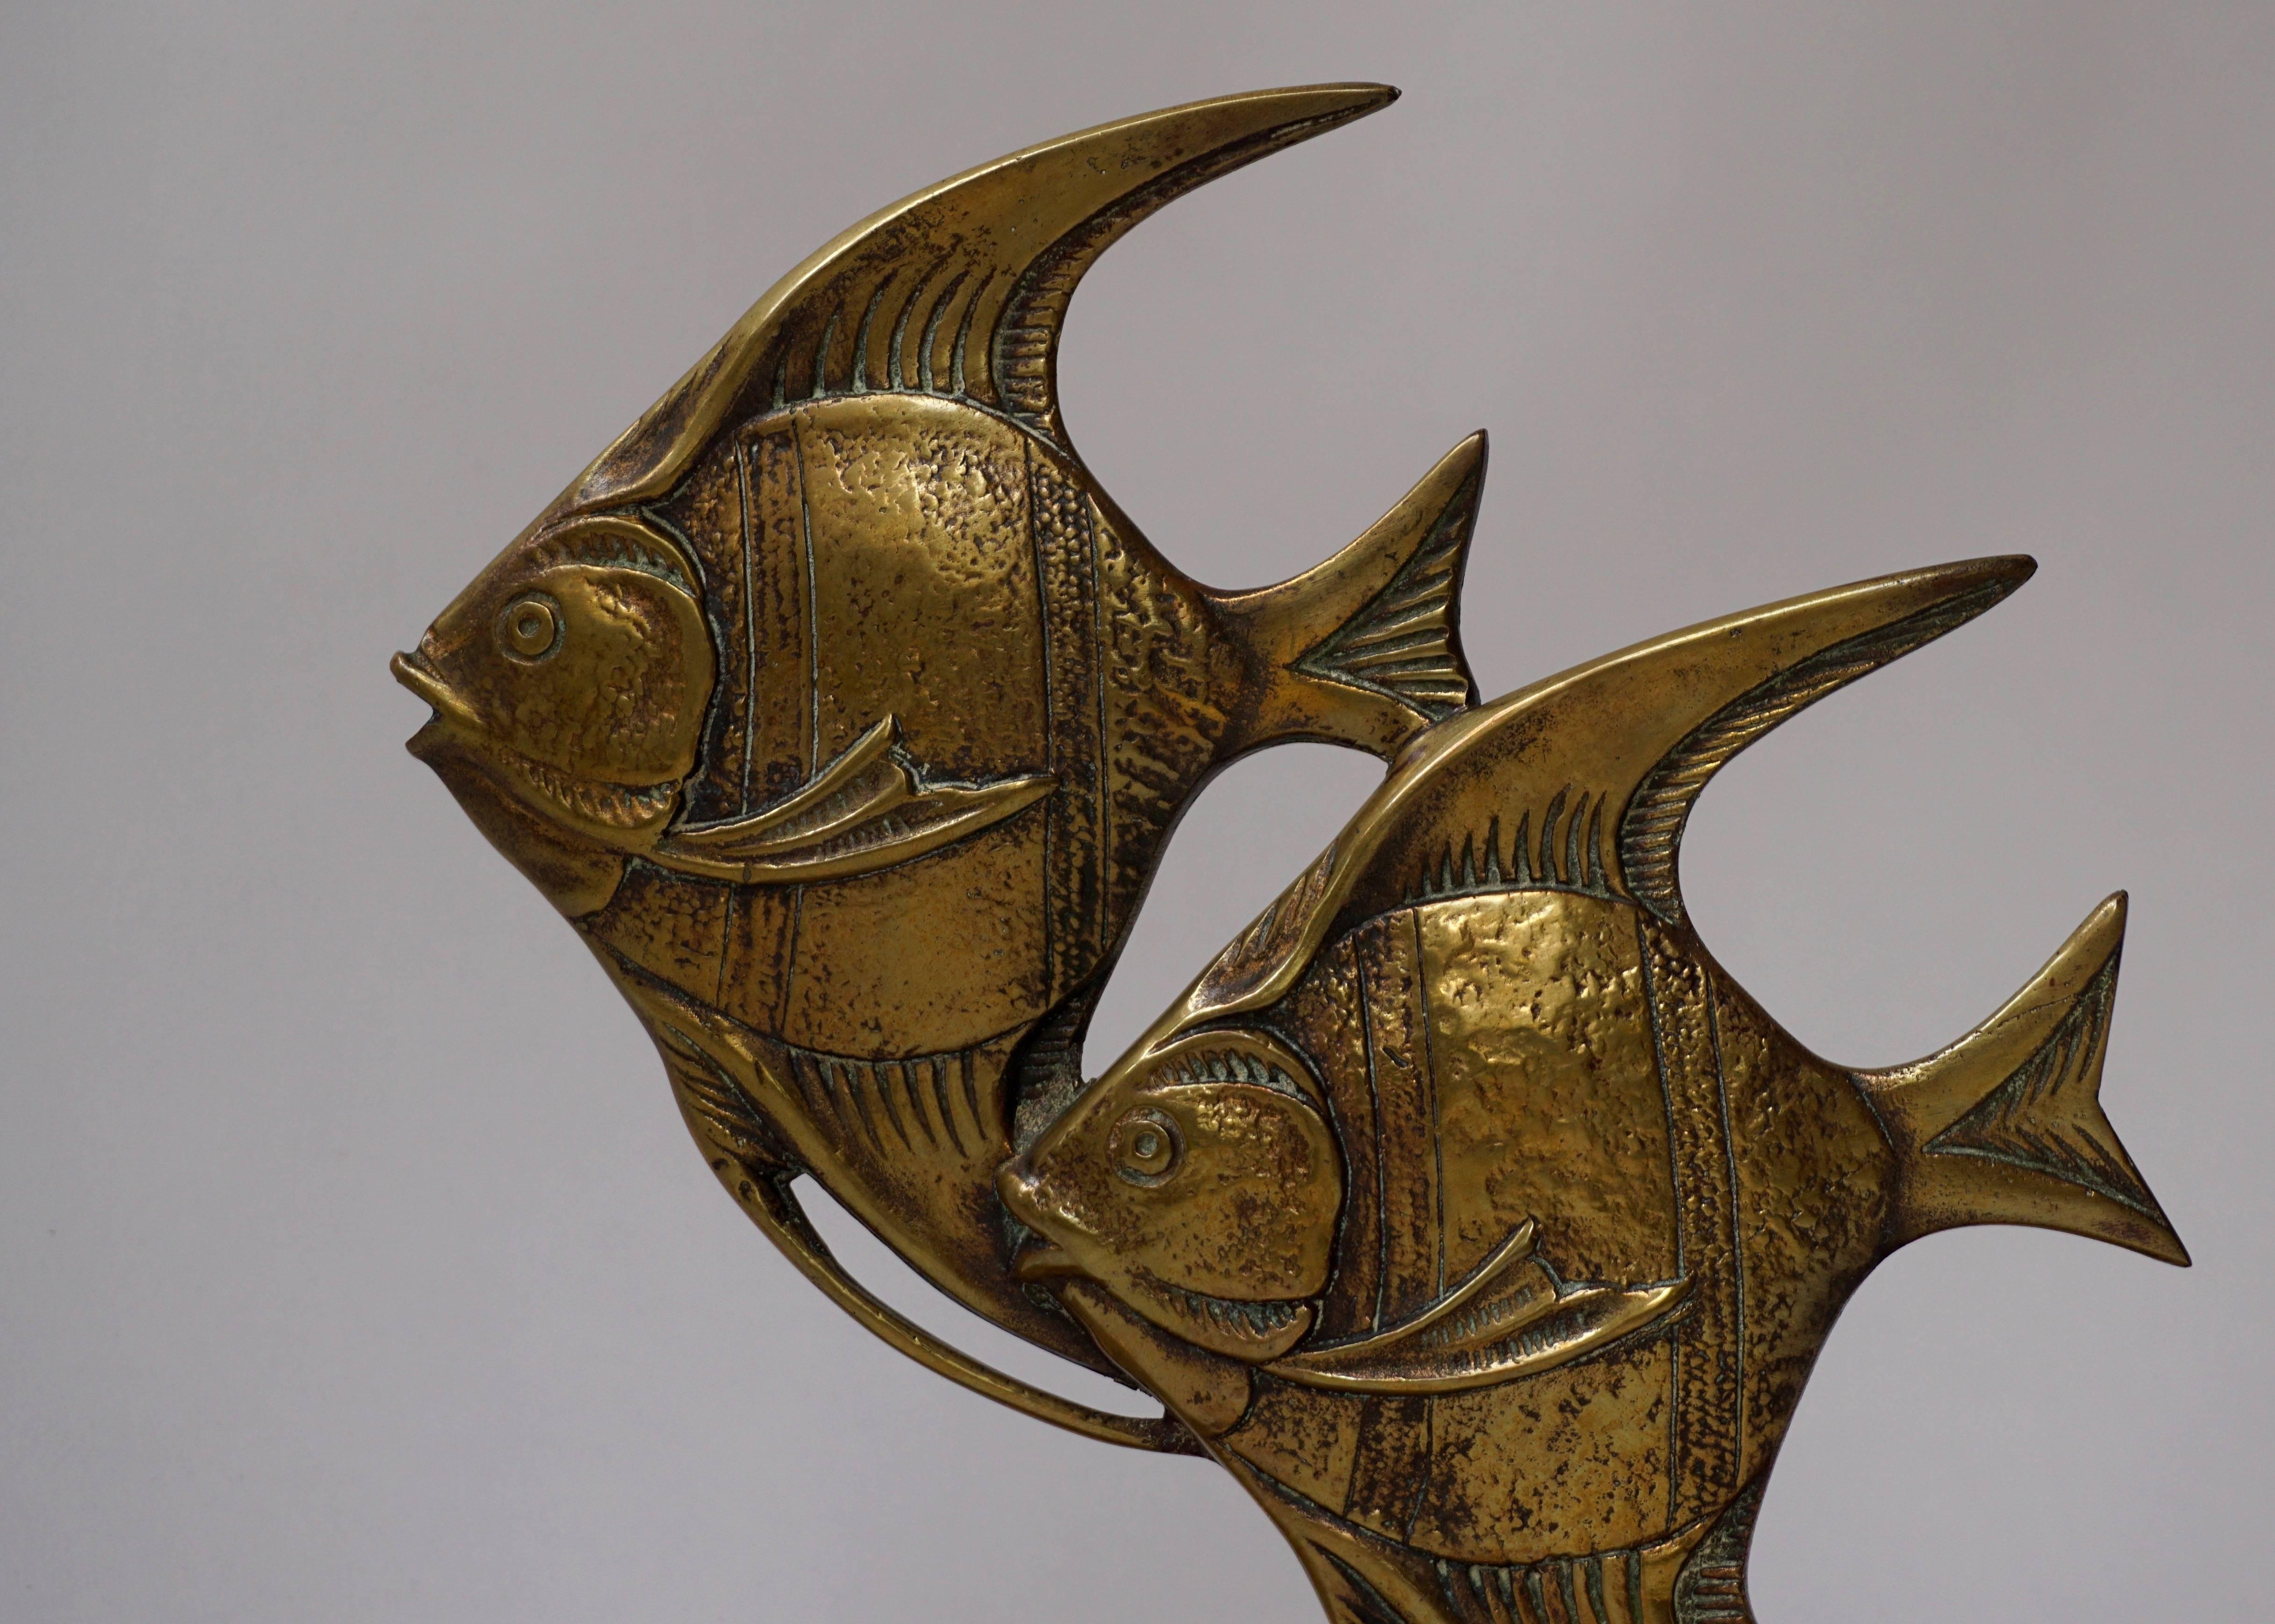 Brass fish sculpture on marble base.